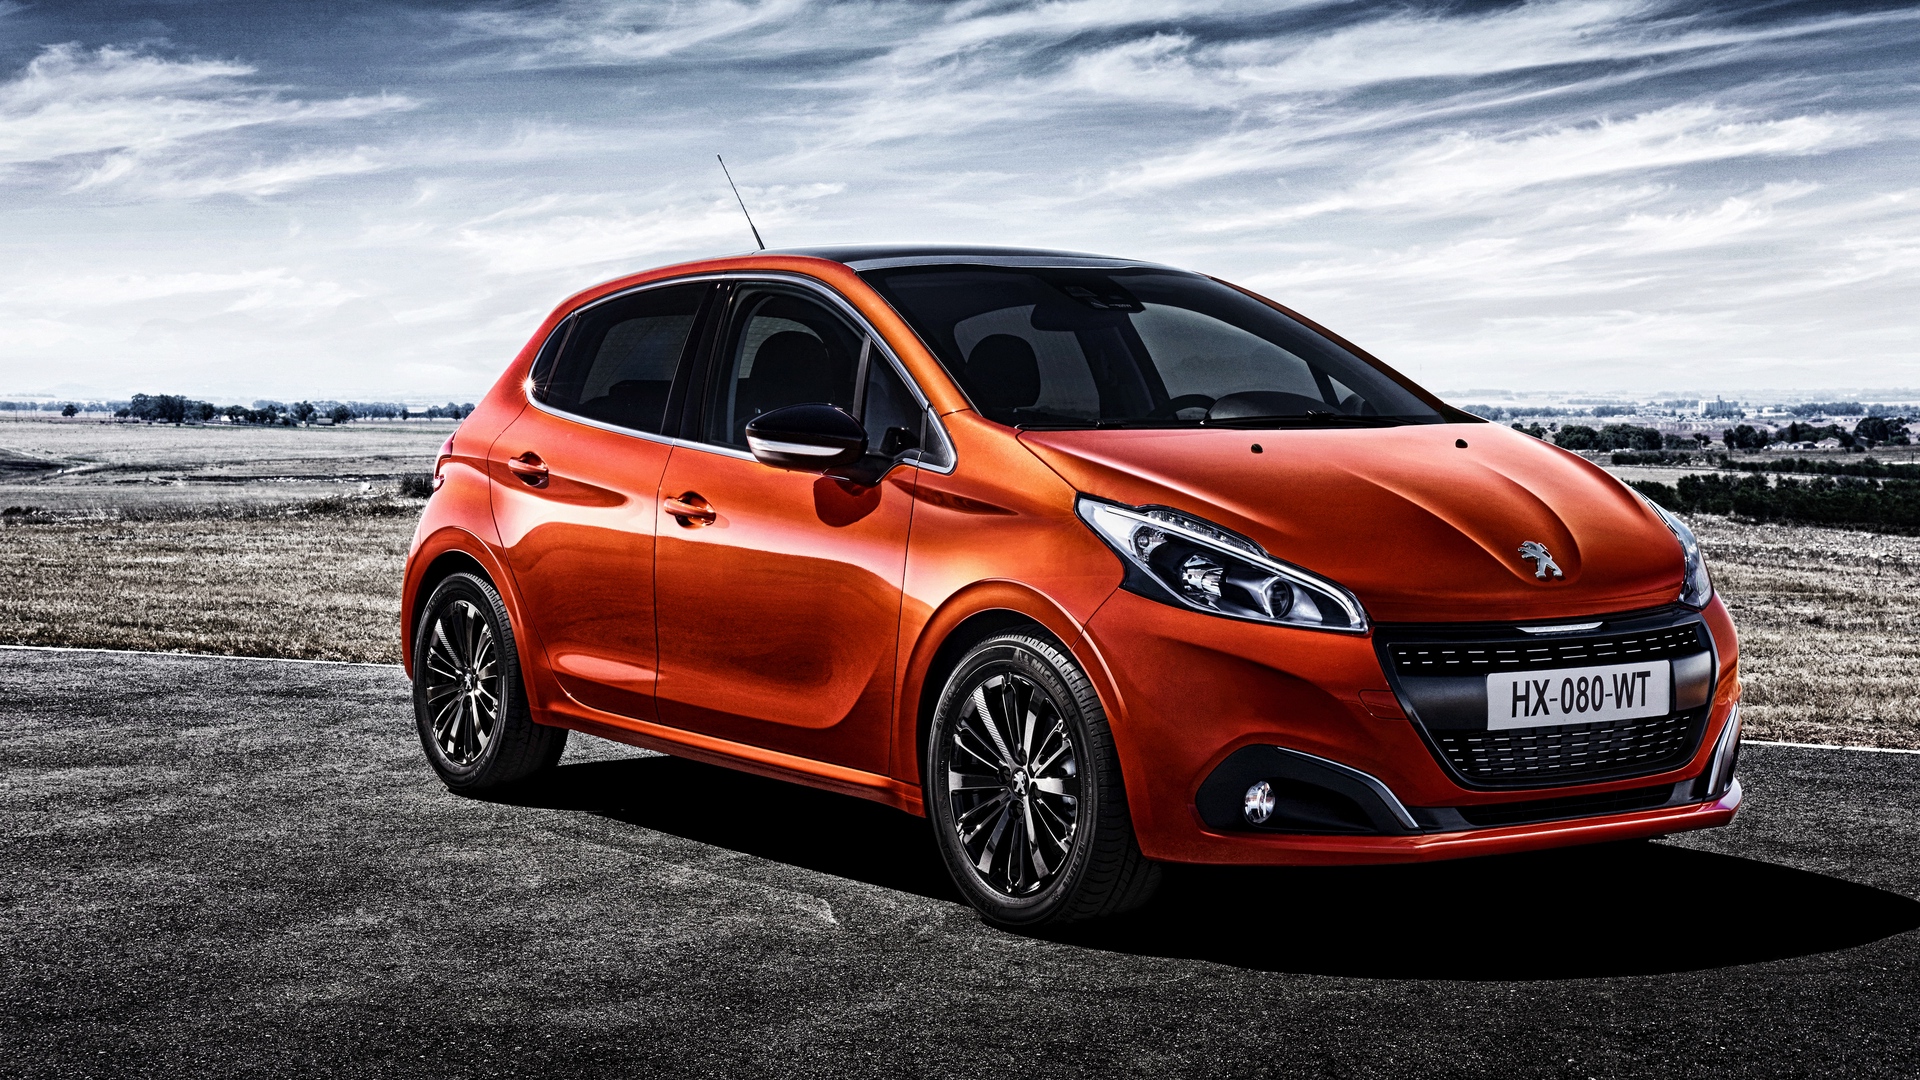 Download wallpaper 1920x1080 peugeot, red, side view full HD